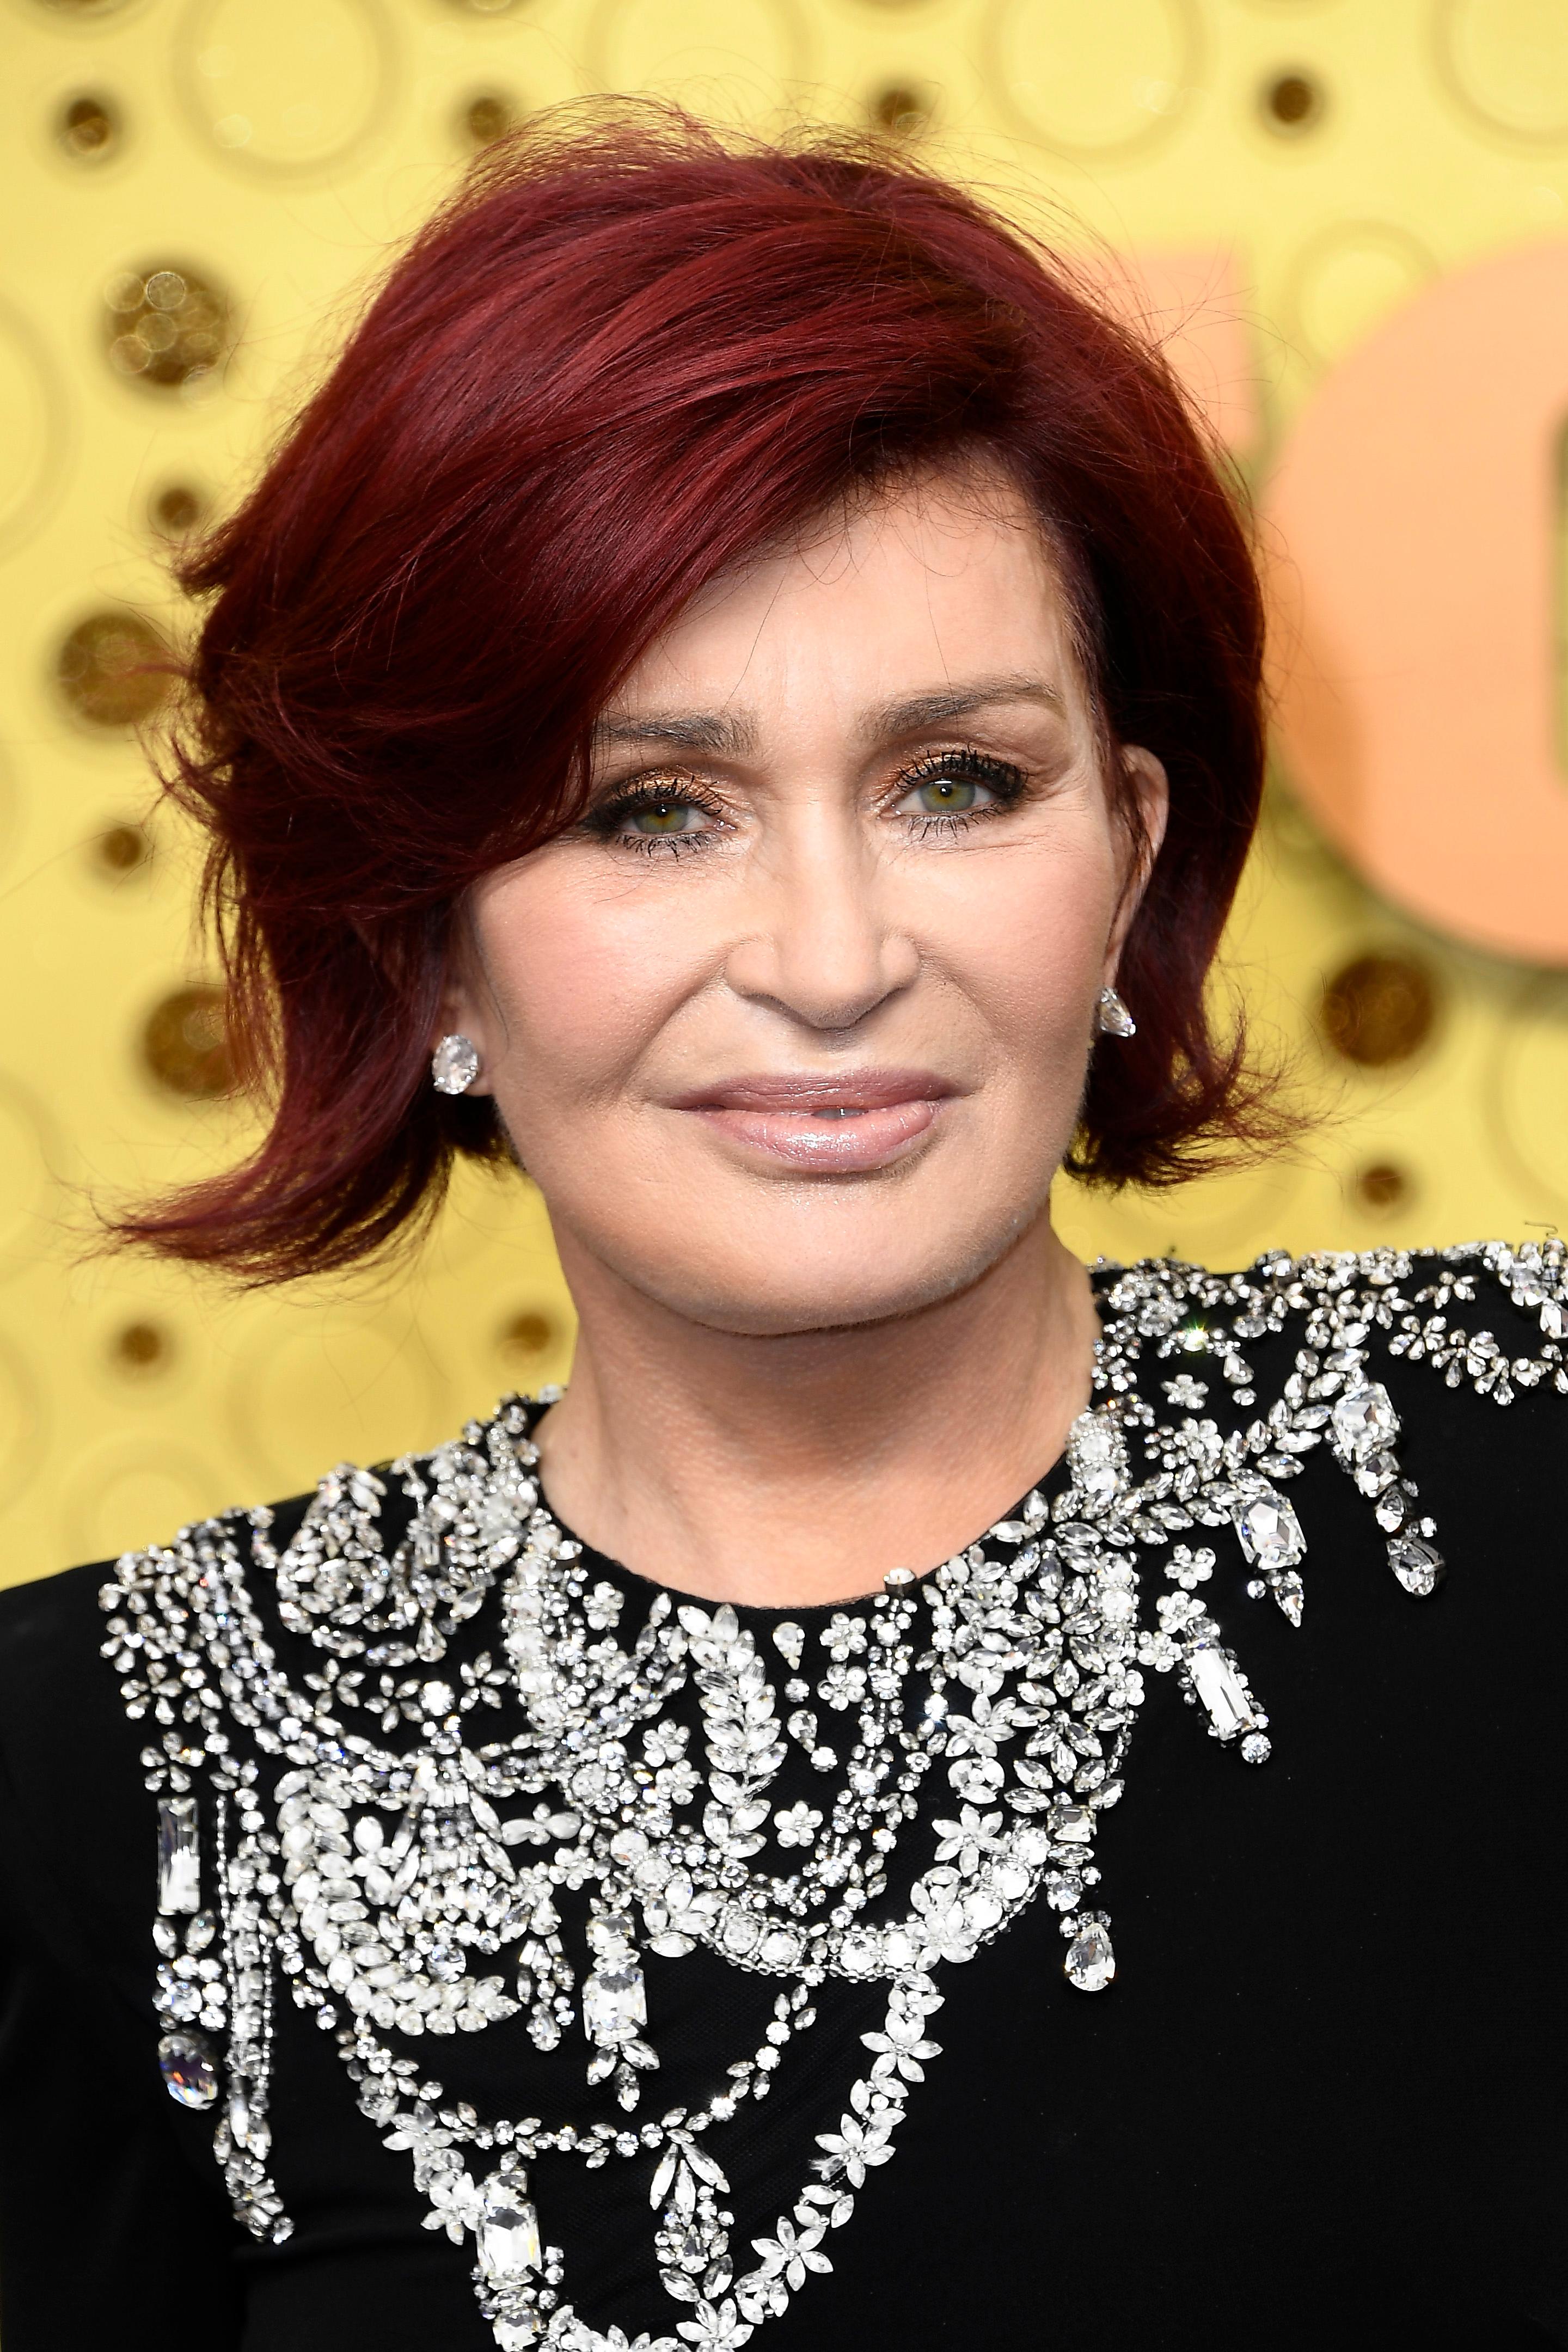 Sharon Osbourne Goes Fully Gray At 67, Ditching Typical Red Hair